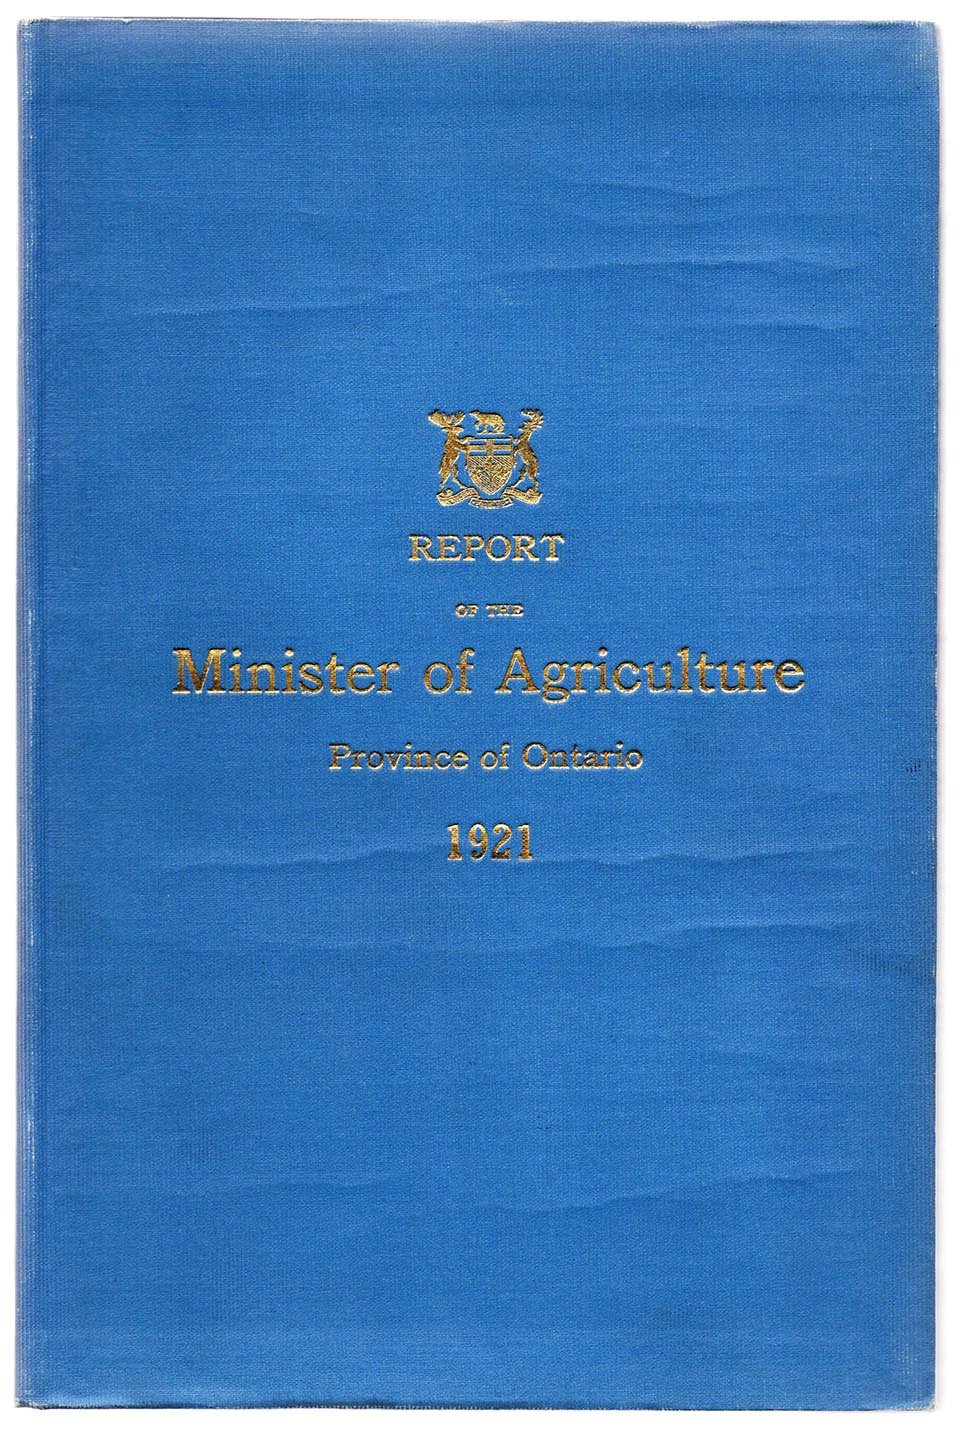 Report of the Minister of Agriculture Province of Ontario for the year ending October 31, 1921